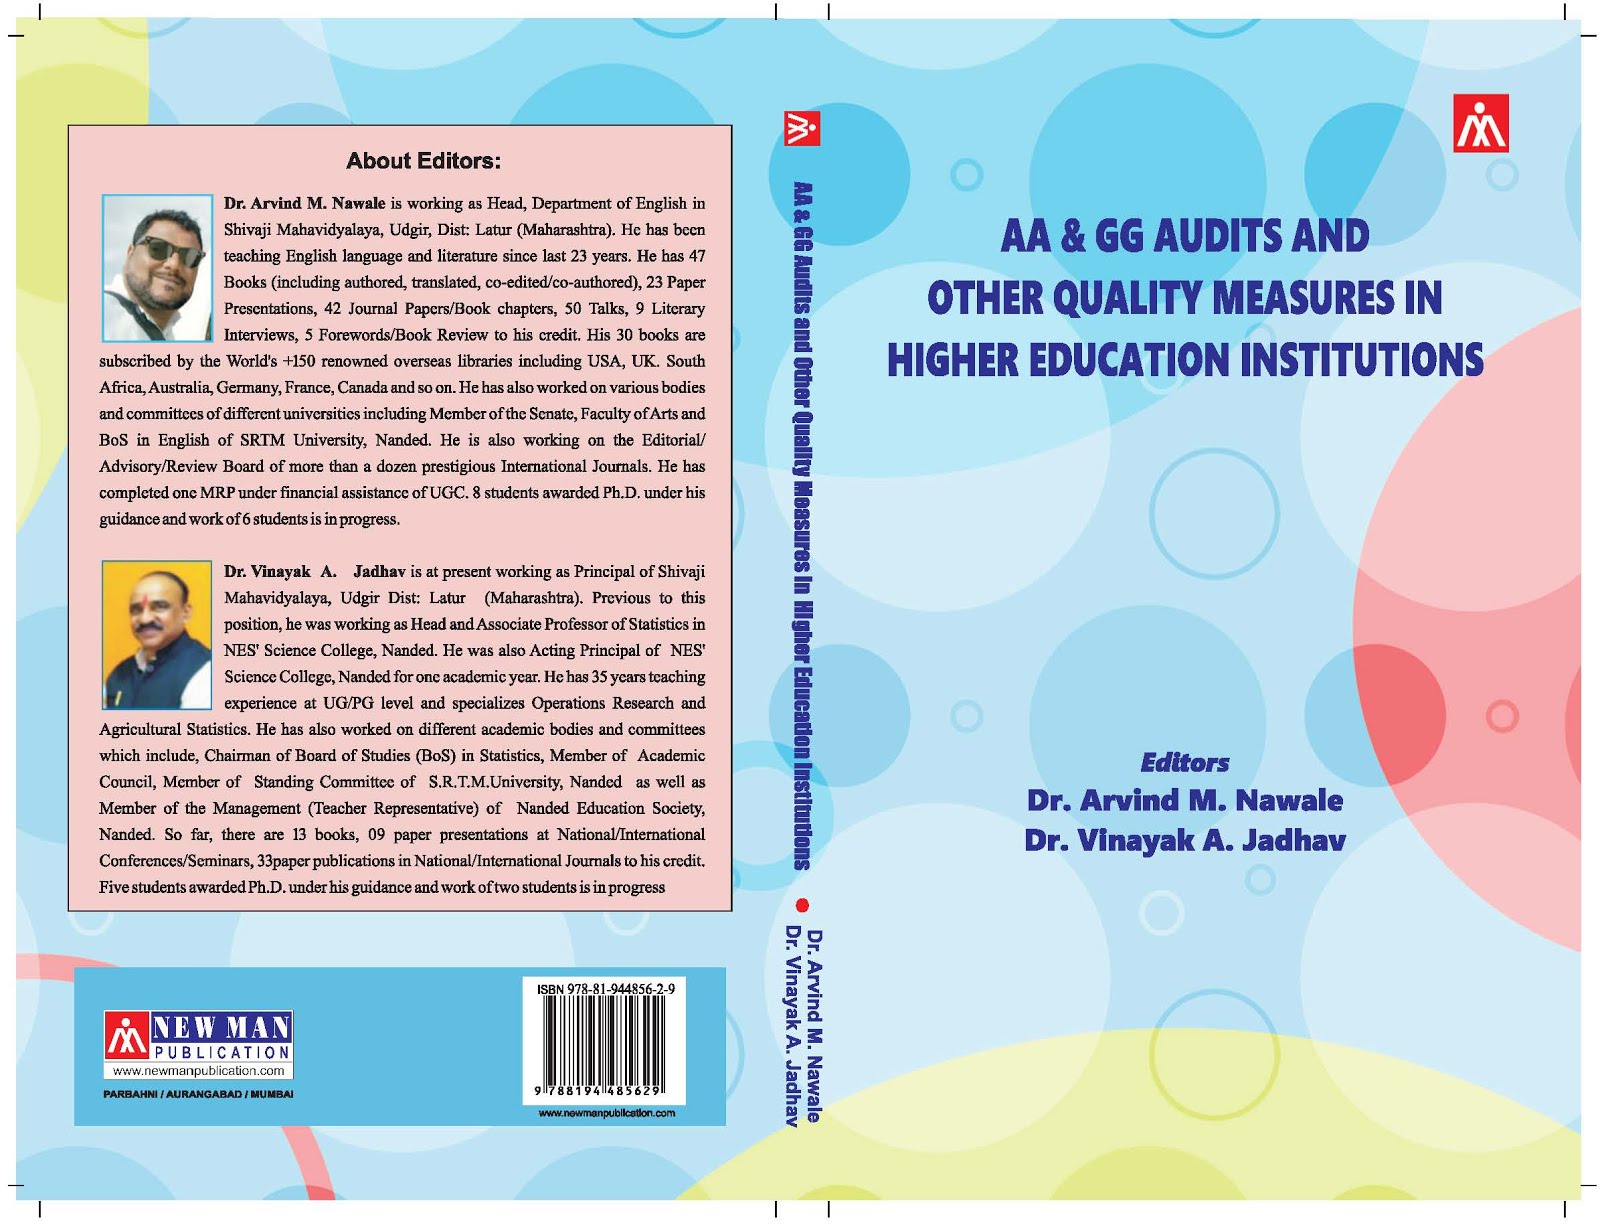 AA & GG Audits and other Quality Measuresin Higher Education Institutions